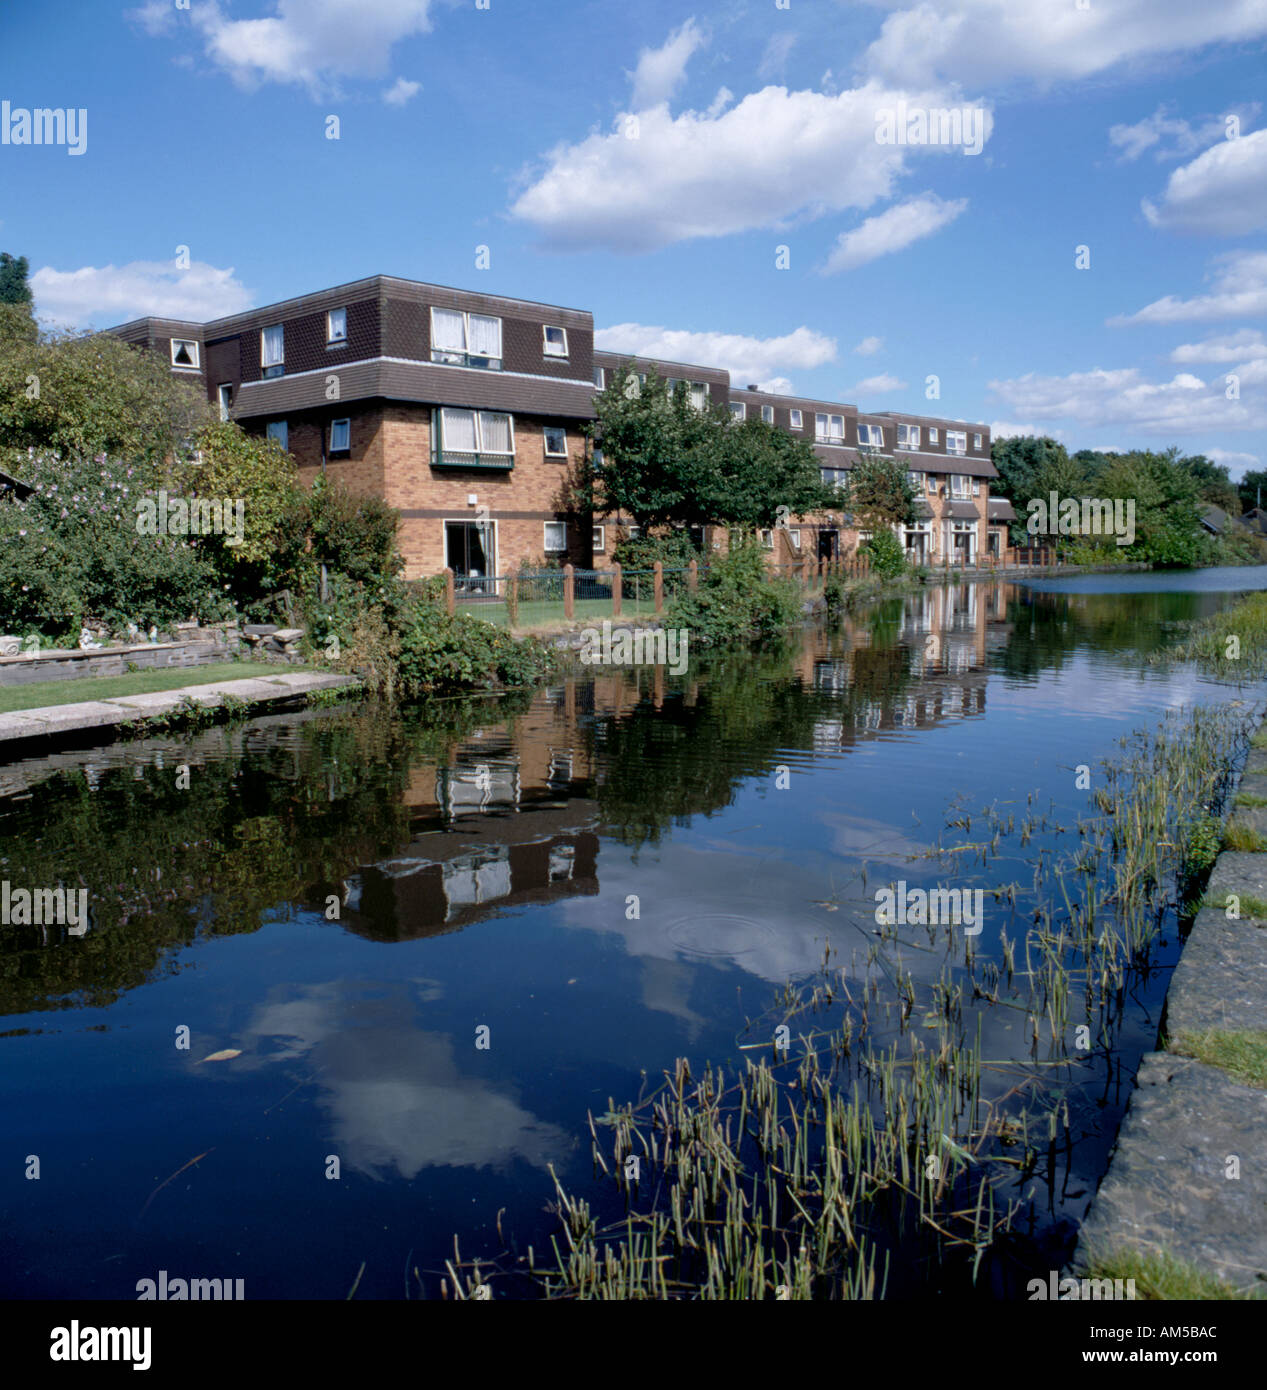 Stanmore House, a sheltered housing block seen, over the Ashton under Lyne Canal, Audenshaw, Tameside, Greater Manchester, England, UK. Stock Photo